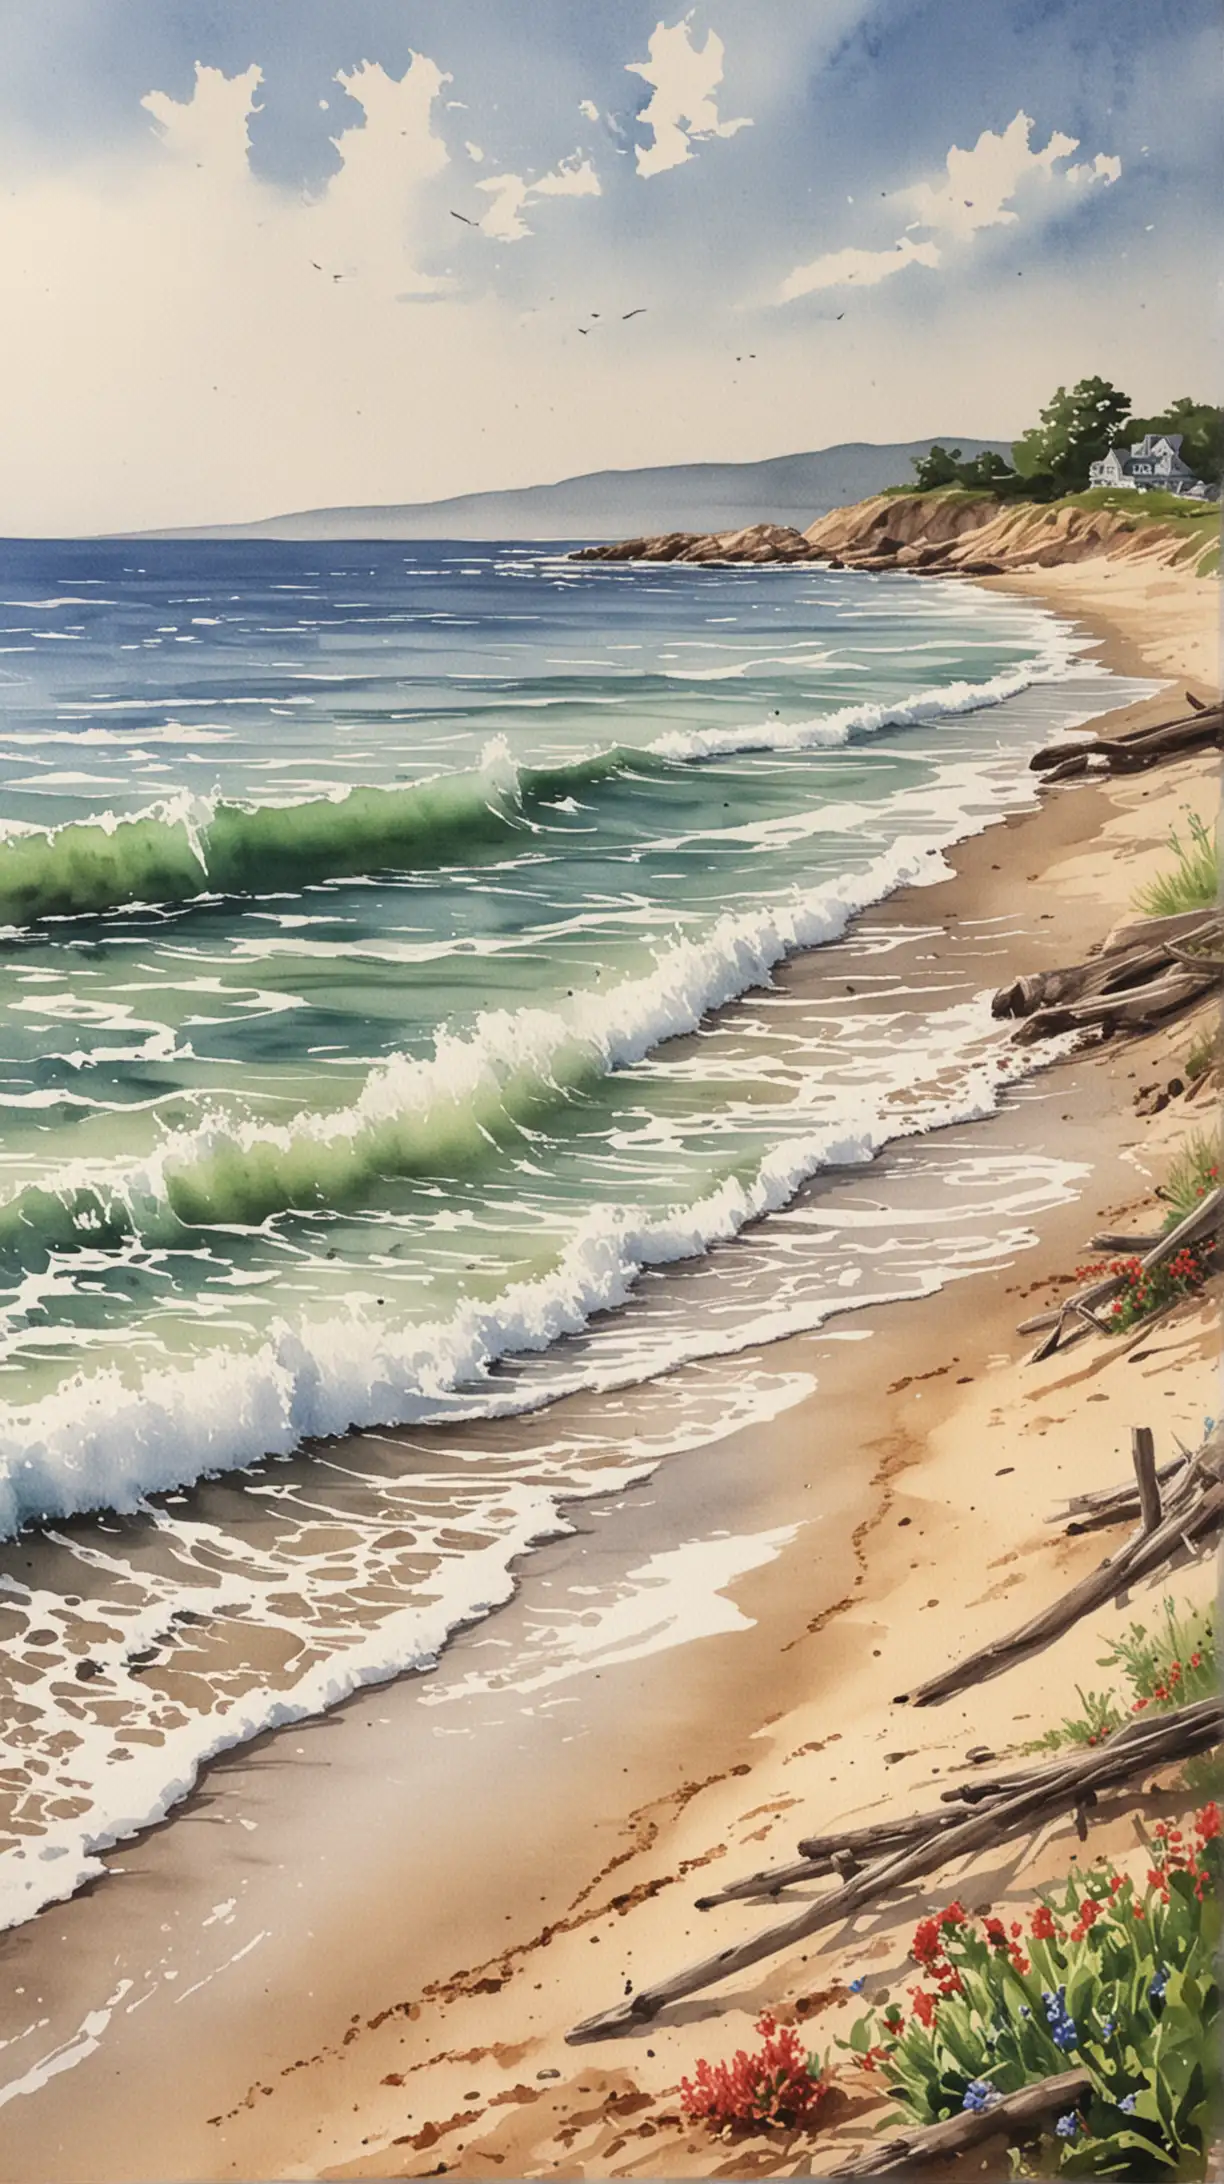 create a watercolor painting of a beach scene with marthas vineyard
 shoreline elements

